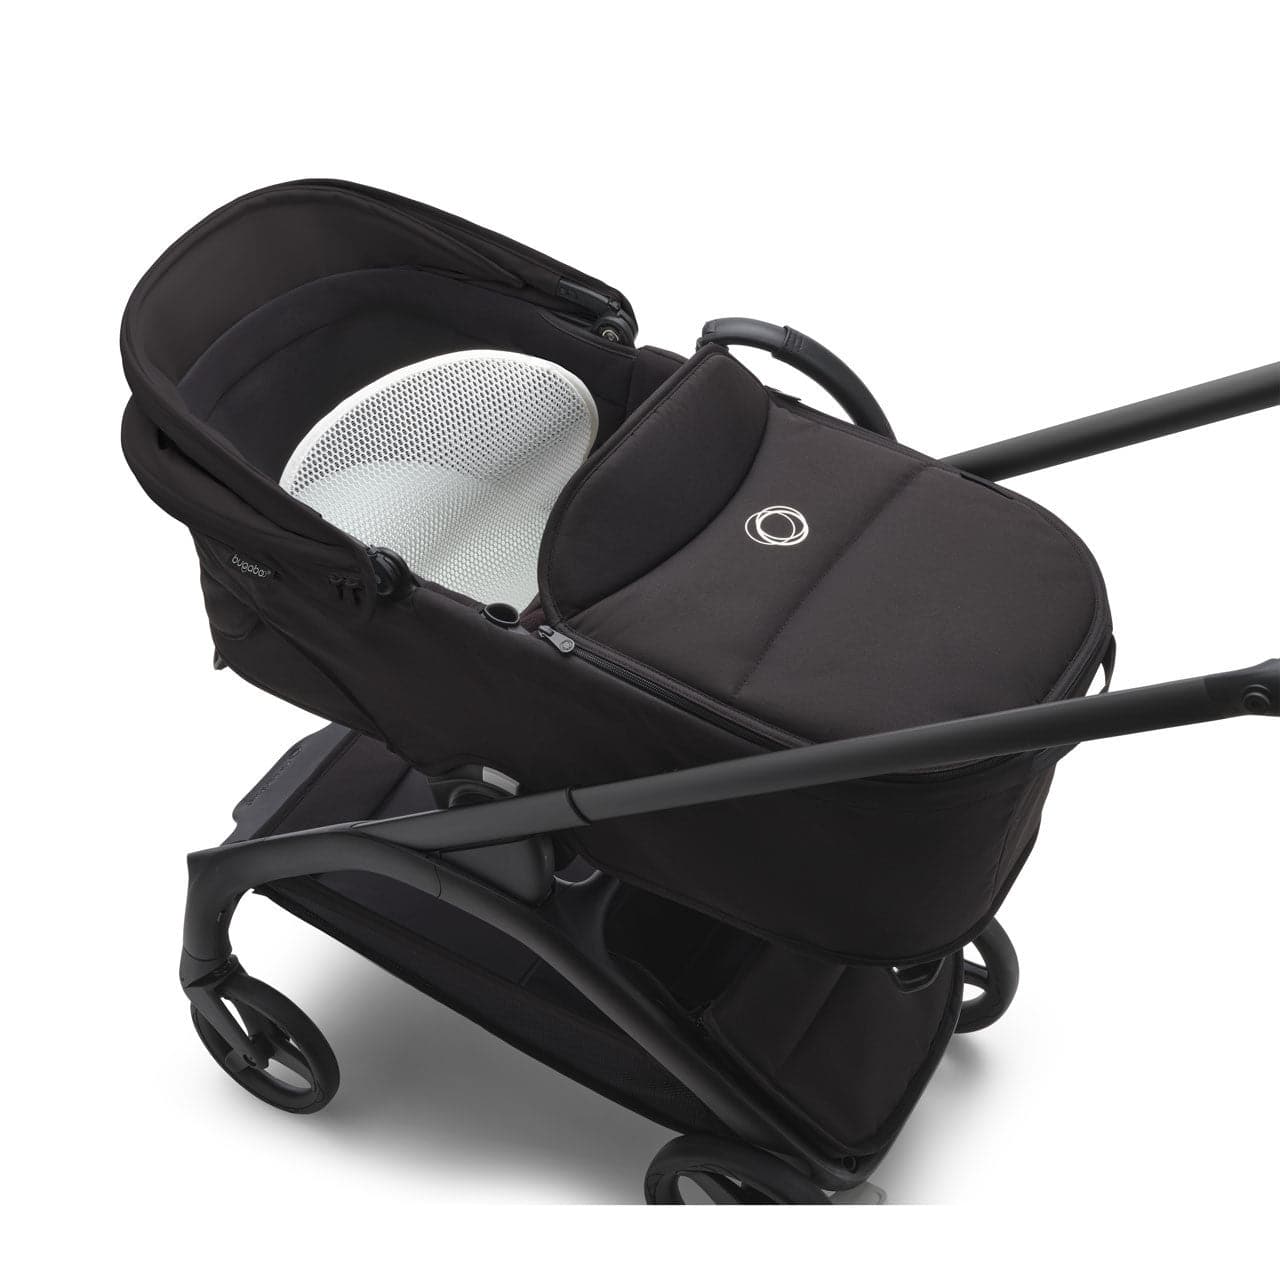 Bugaboo Dragonfly Ultimate Travel System Bundle - Midnight Black - For Your Little One